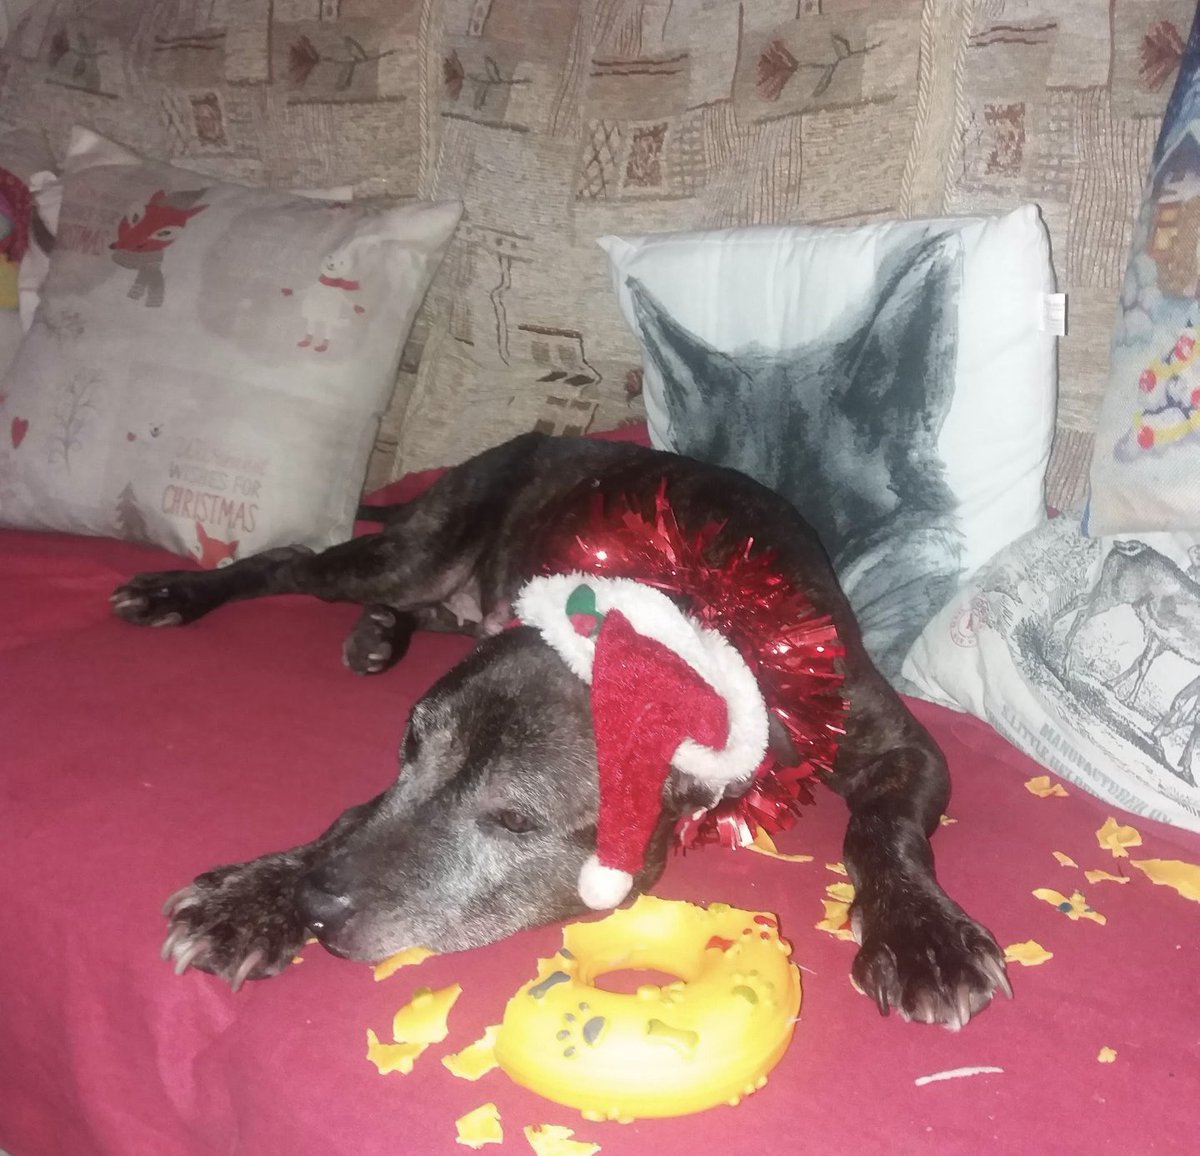 Rosie on her #last #ChristmasDay that she would spend with me in 2019. She was #havingfun here #playing but was #gettingtired, #blessher. 😀 ❤️ xxxxxxxxxx

#christmas #christmas2019 #fun #mydog #dog #dogs